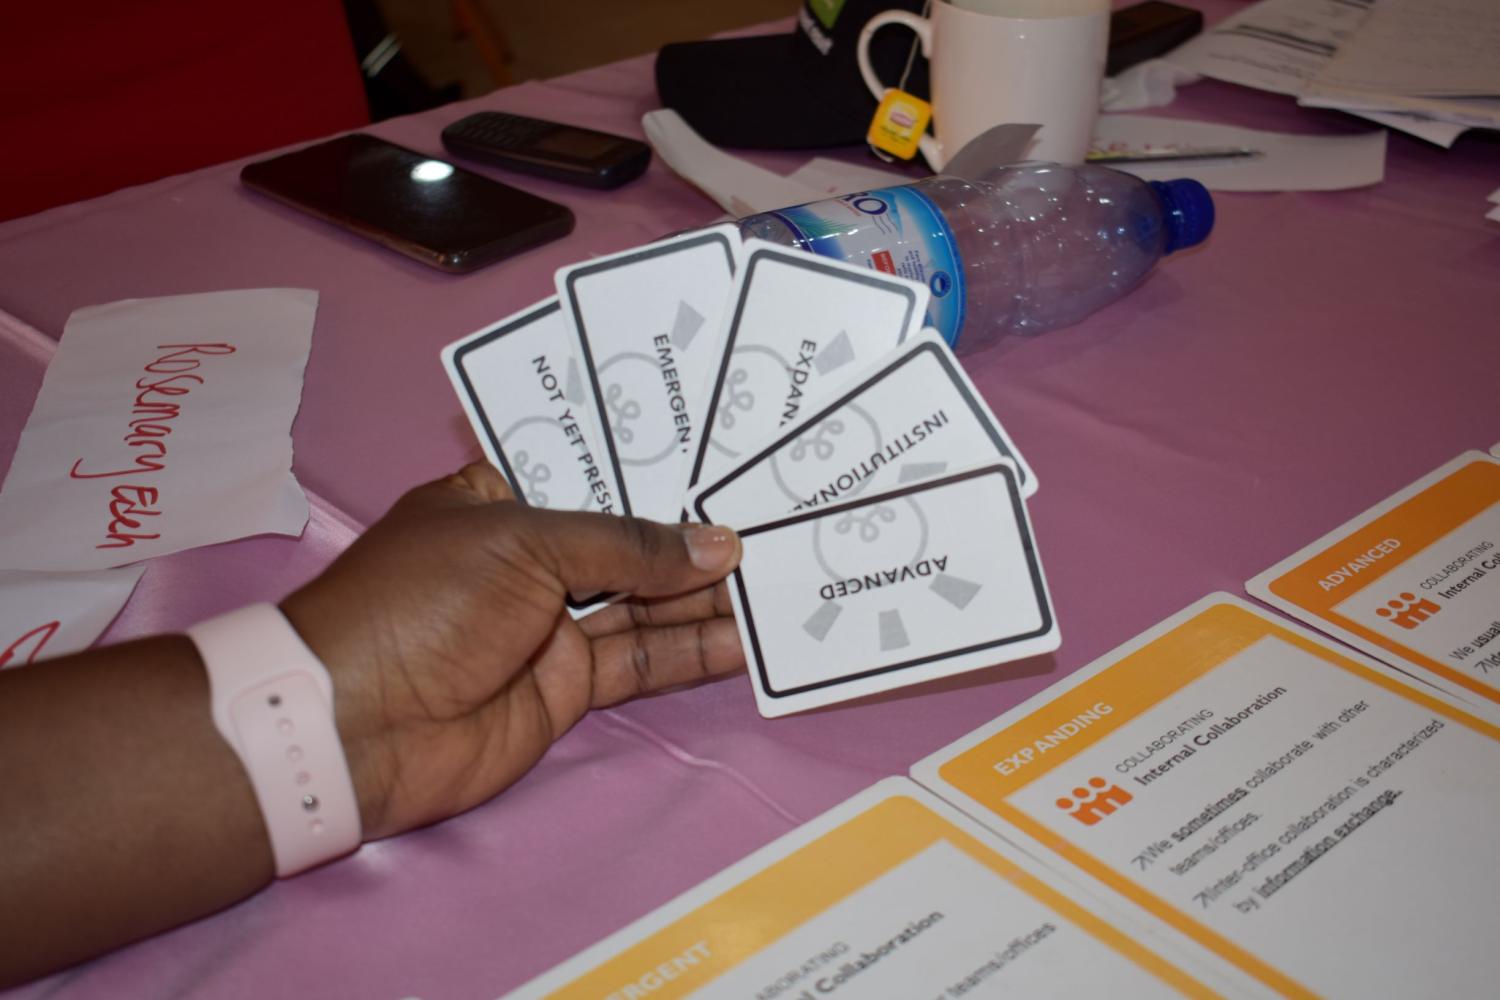 CLA Self-assessment process using the CLA maturity card at the Annual CLA Workshop